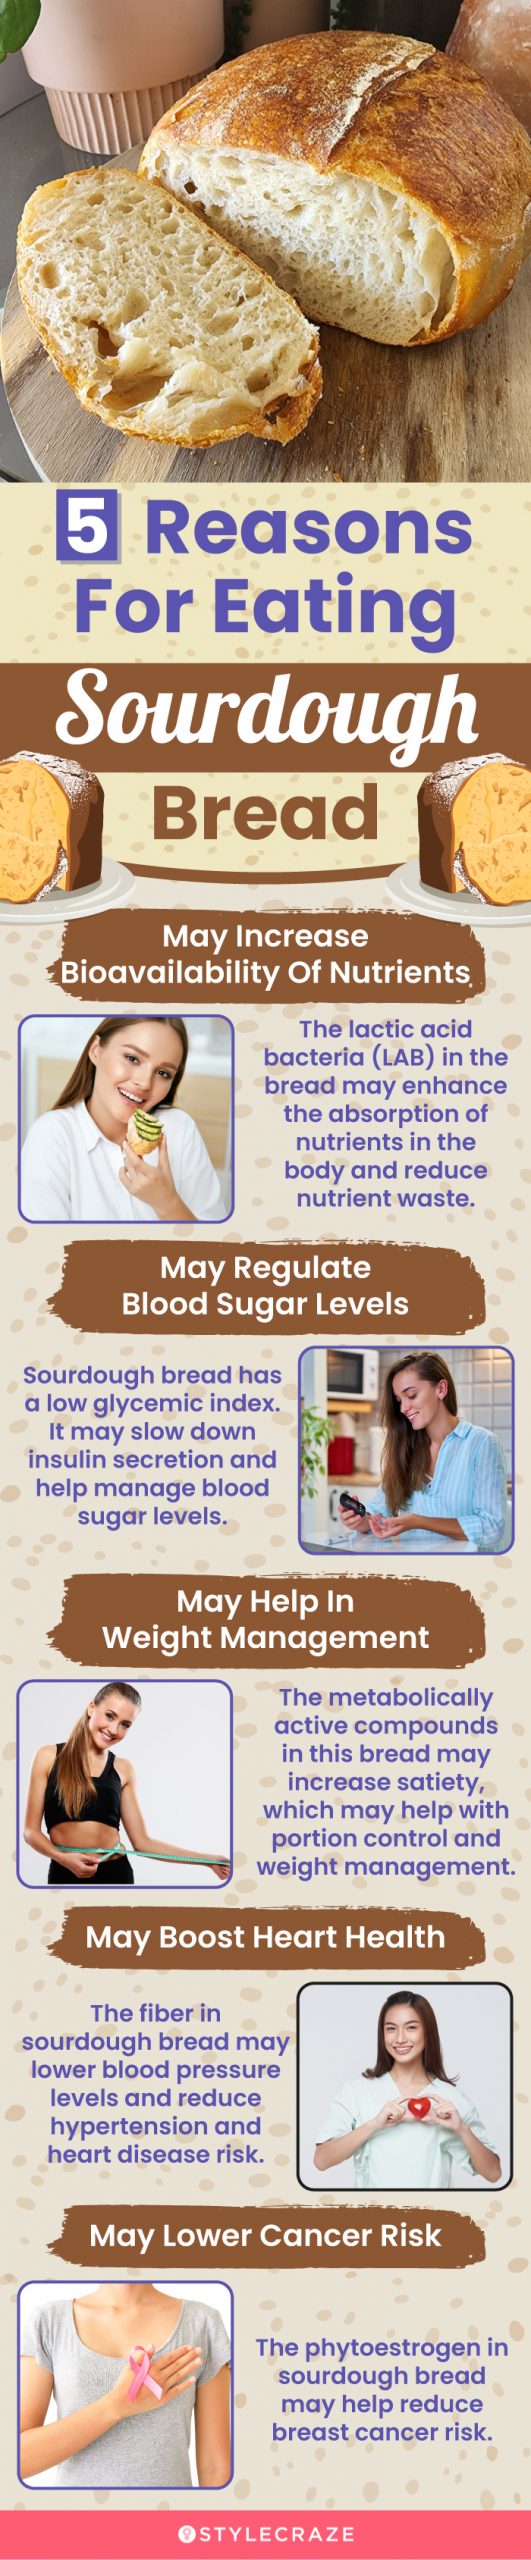 5 reasons for eating sourdough bread (infographic)